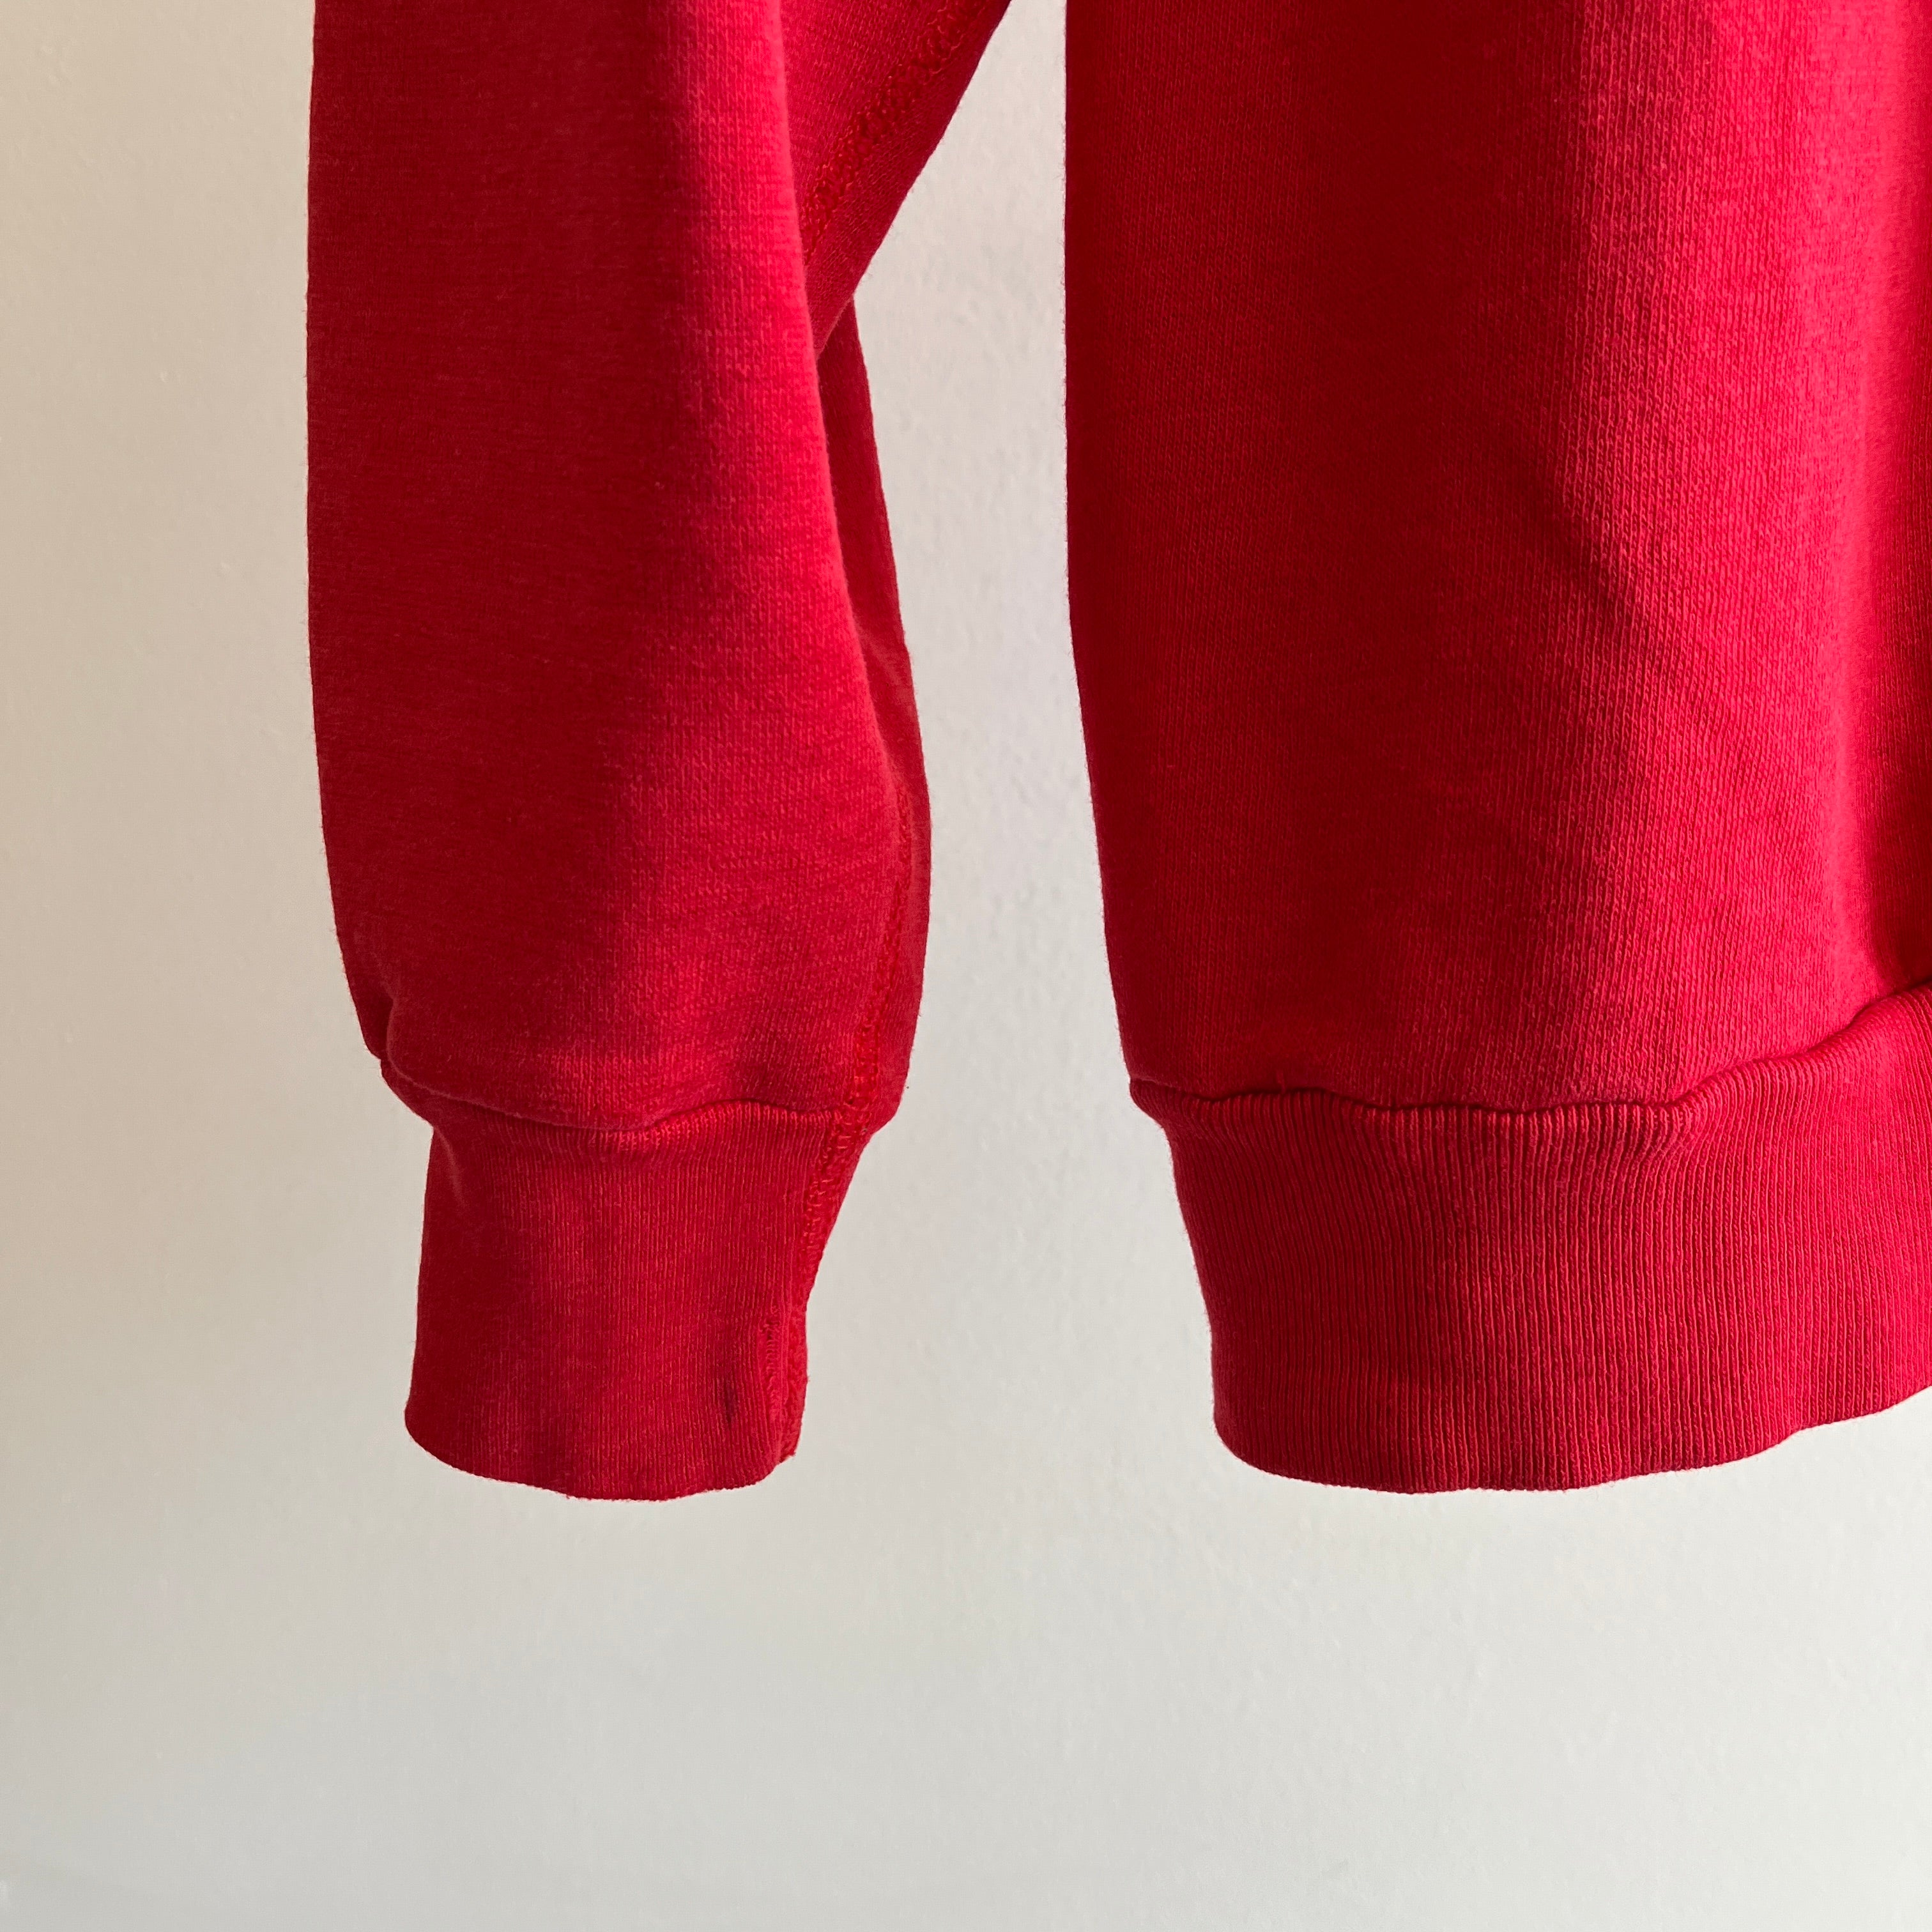 1980s Buttery Soft Arm Gusset Blank Red Sweatshirt - Mieux que la moyenne !